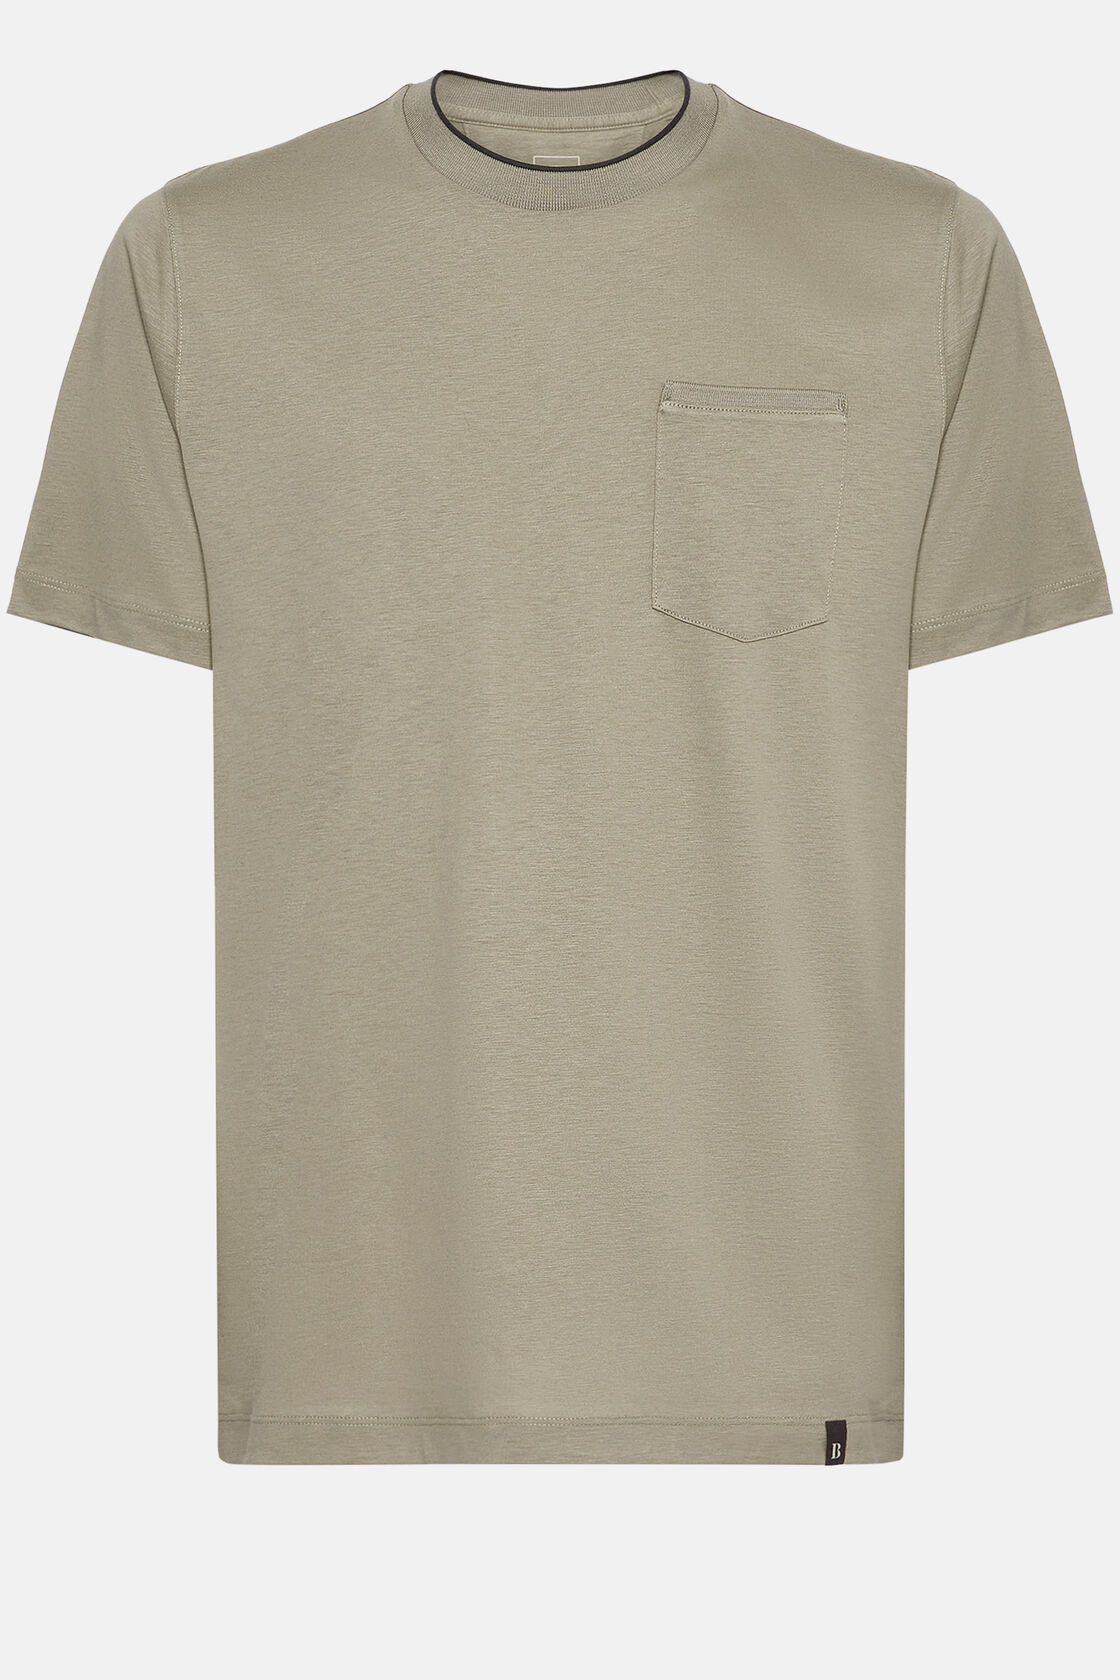 T-Shirt in Cotton and Tencel Jersey, Taupe, hi-res